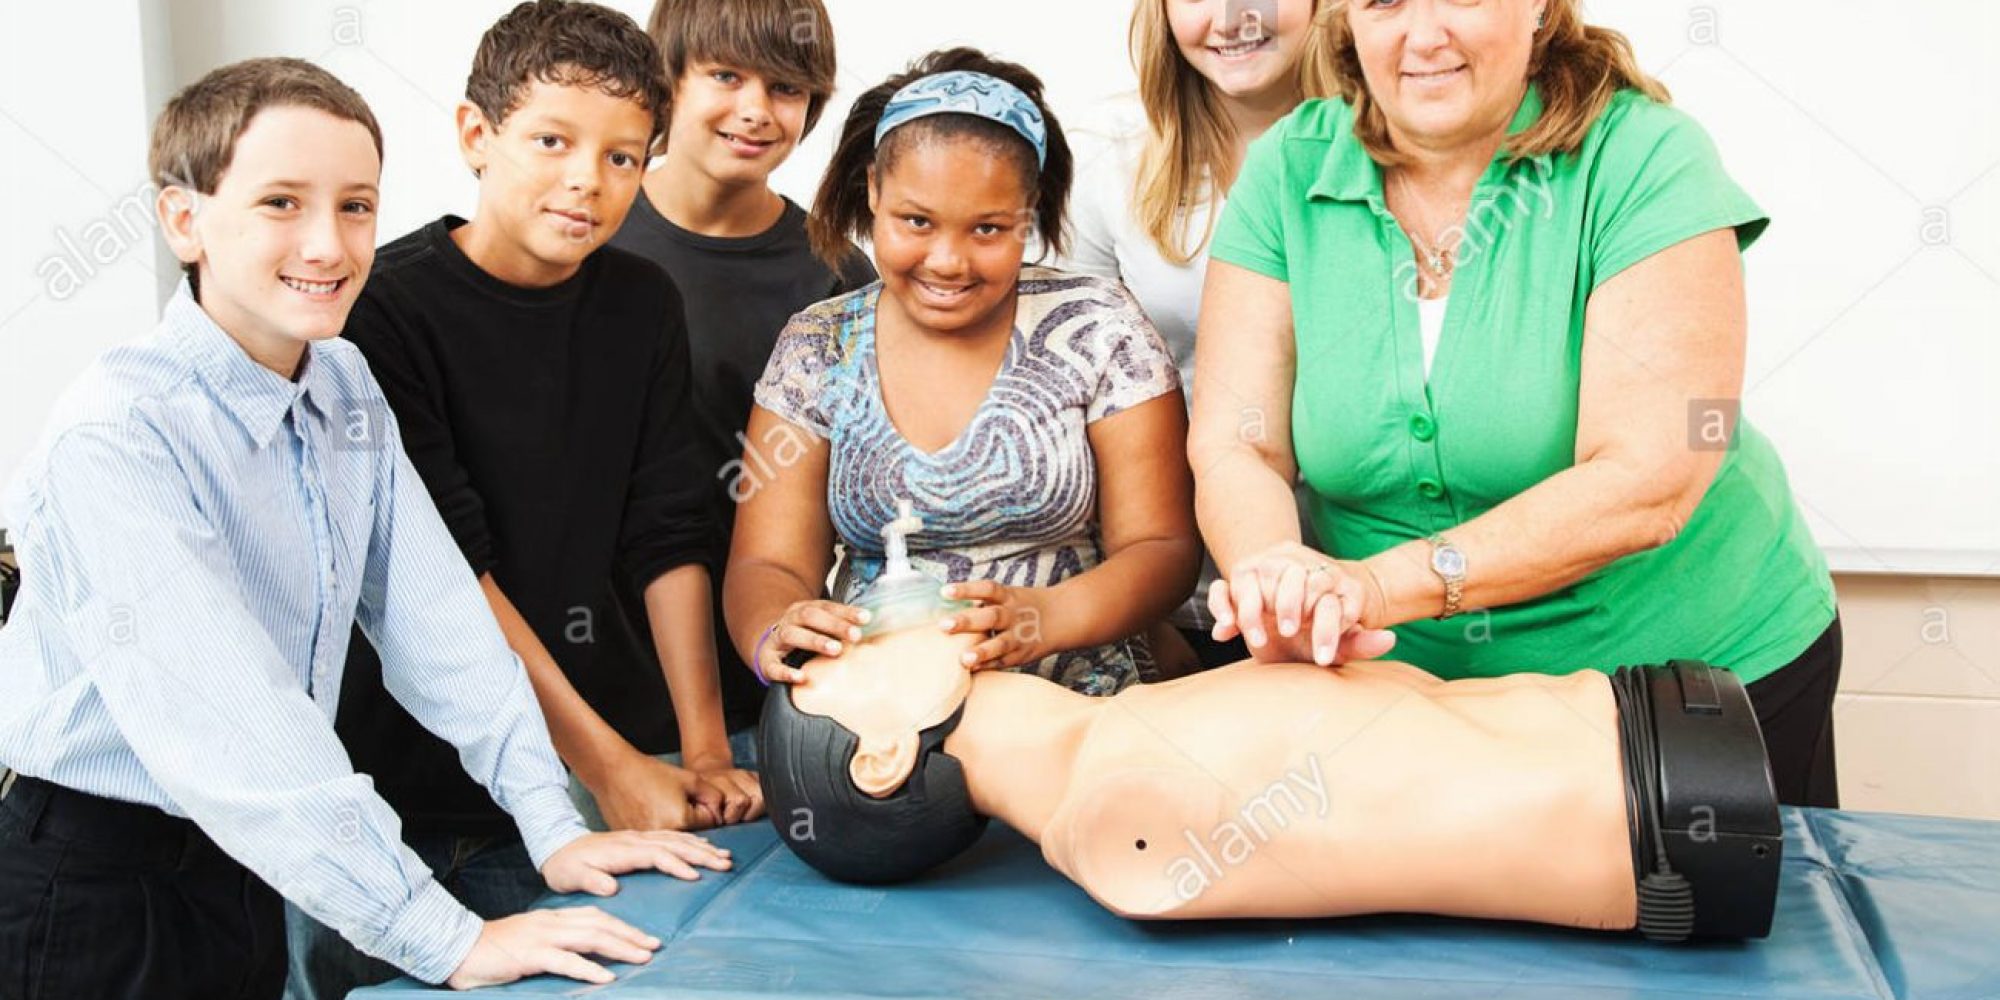 group-of-students-and-their-teacher-learning-cpr-in-school-CP9T4Y